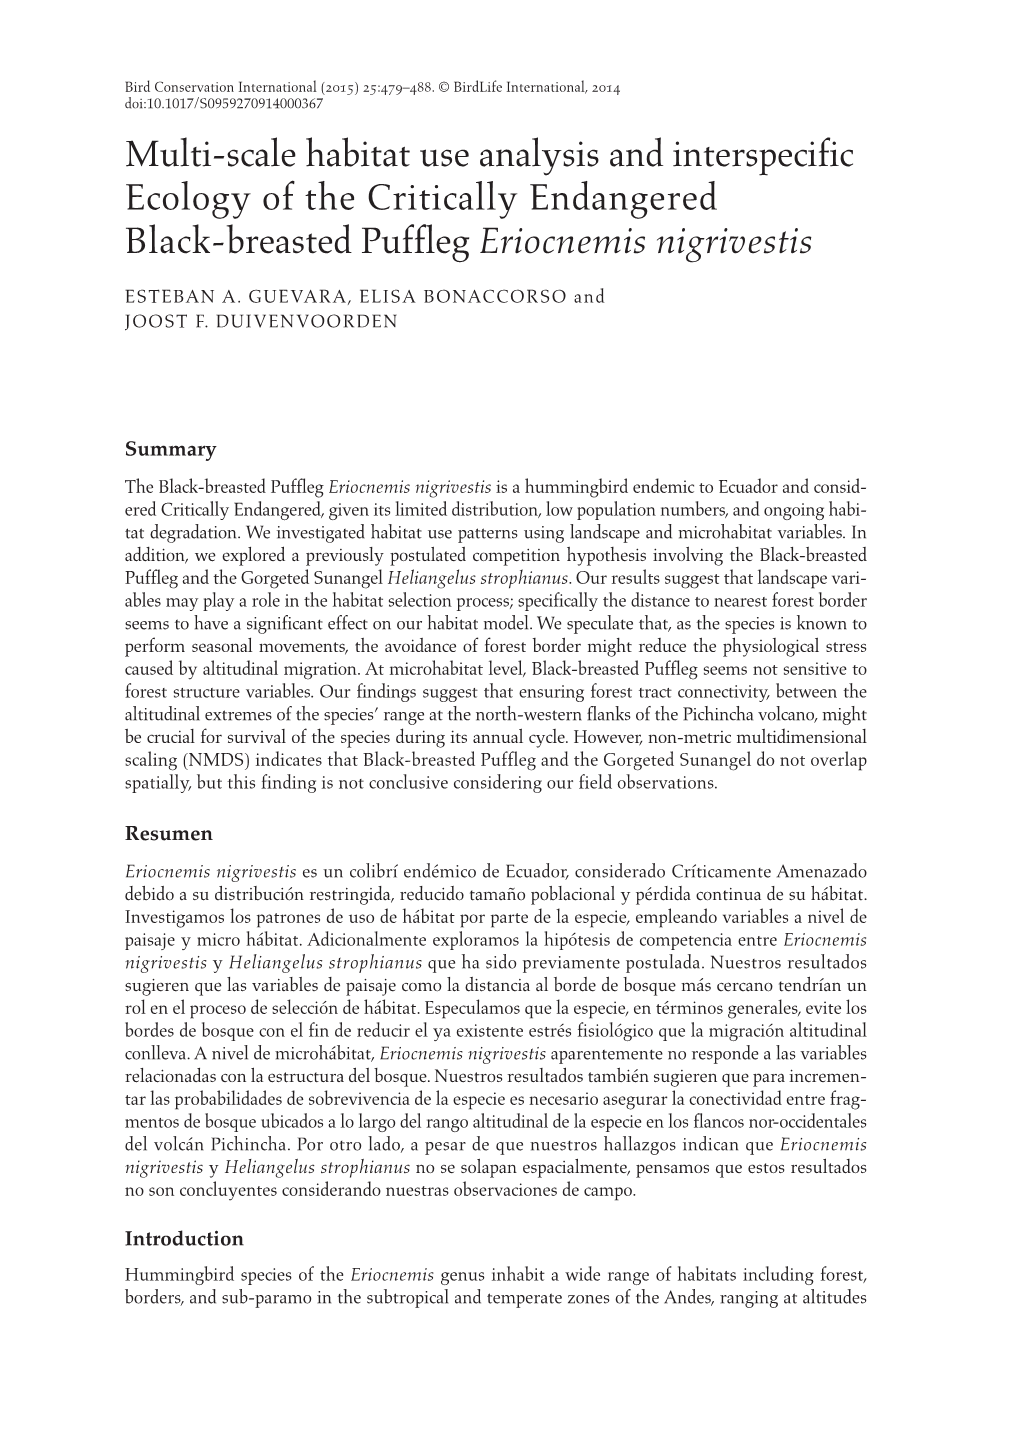 Multi-Scale Habitat Use Analysis and Interspecific Ecology of the Critically Endangered Black-Breasted Puffleg Eriocnemis Nigrivestis